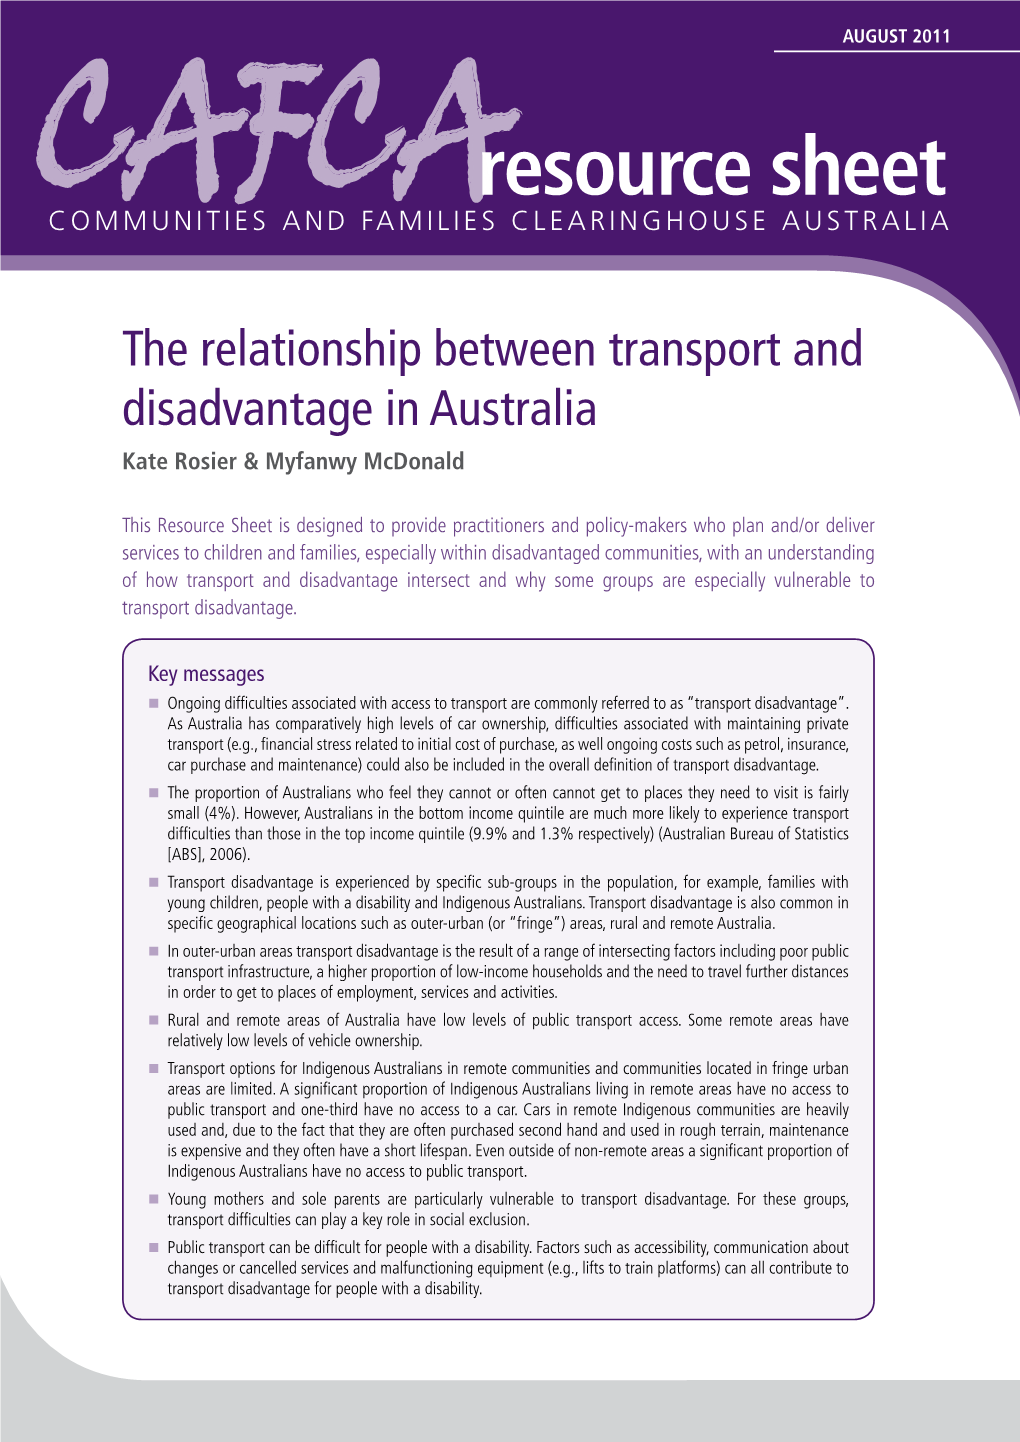 The Relationship Between Transport and Disadvantage in Australia Kate Rosier & Myfanwy Mcdonald